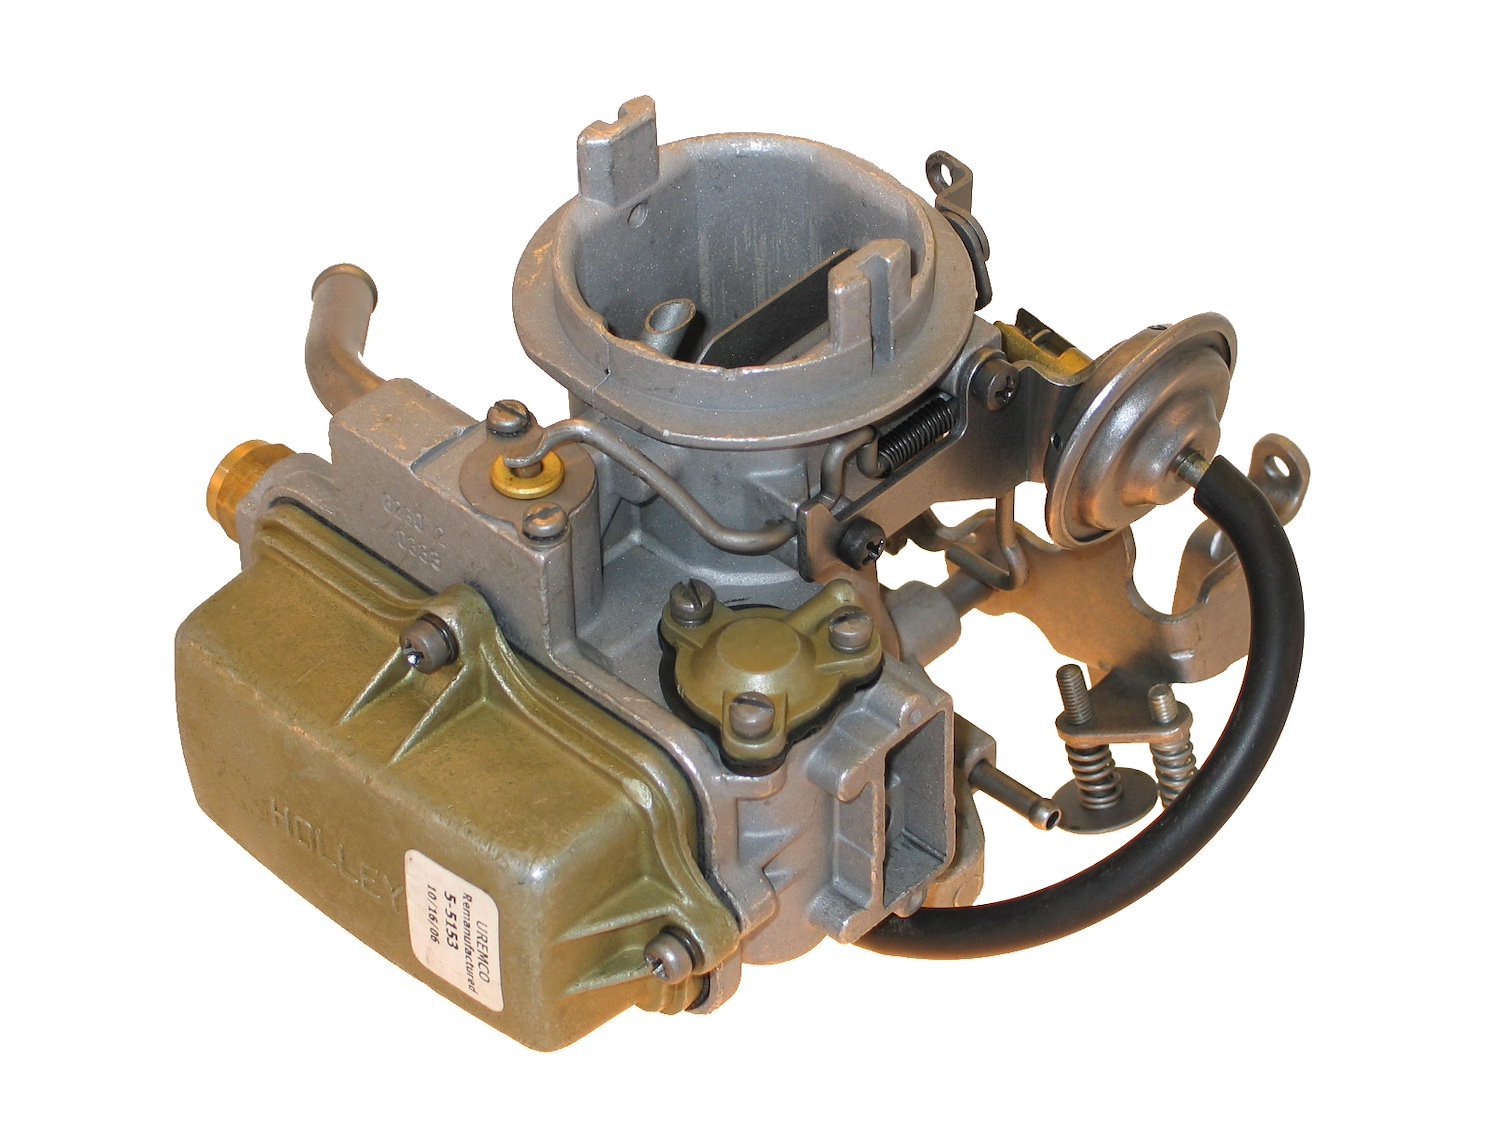 7-7145 Holley Remanufactured Carburetor, 1920-Style